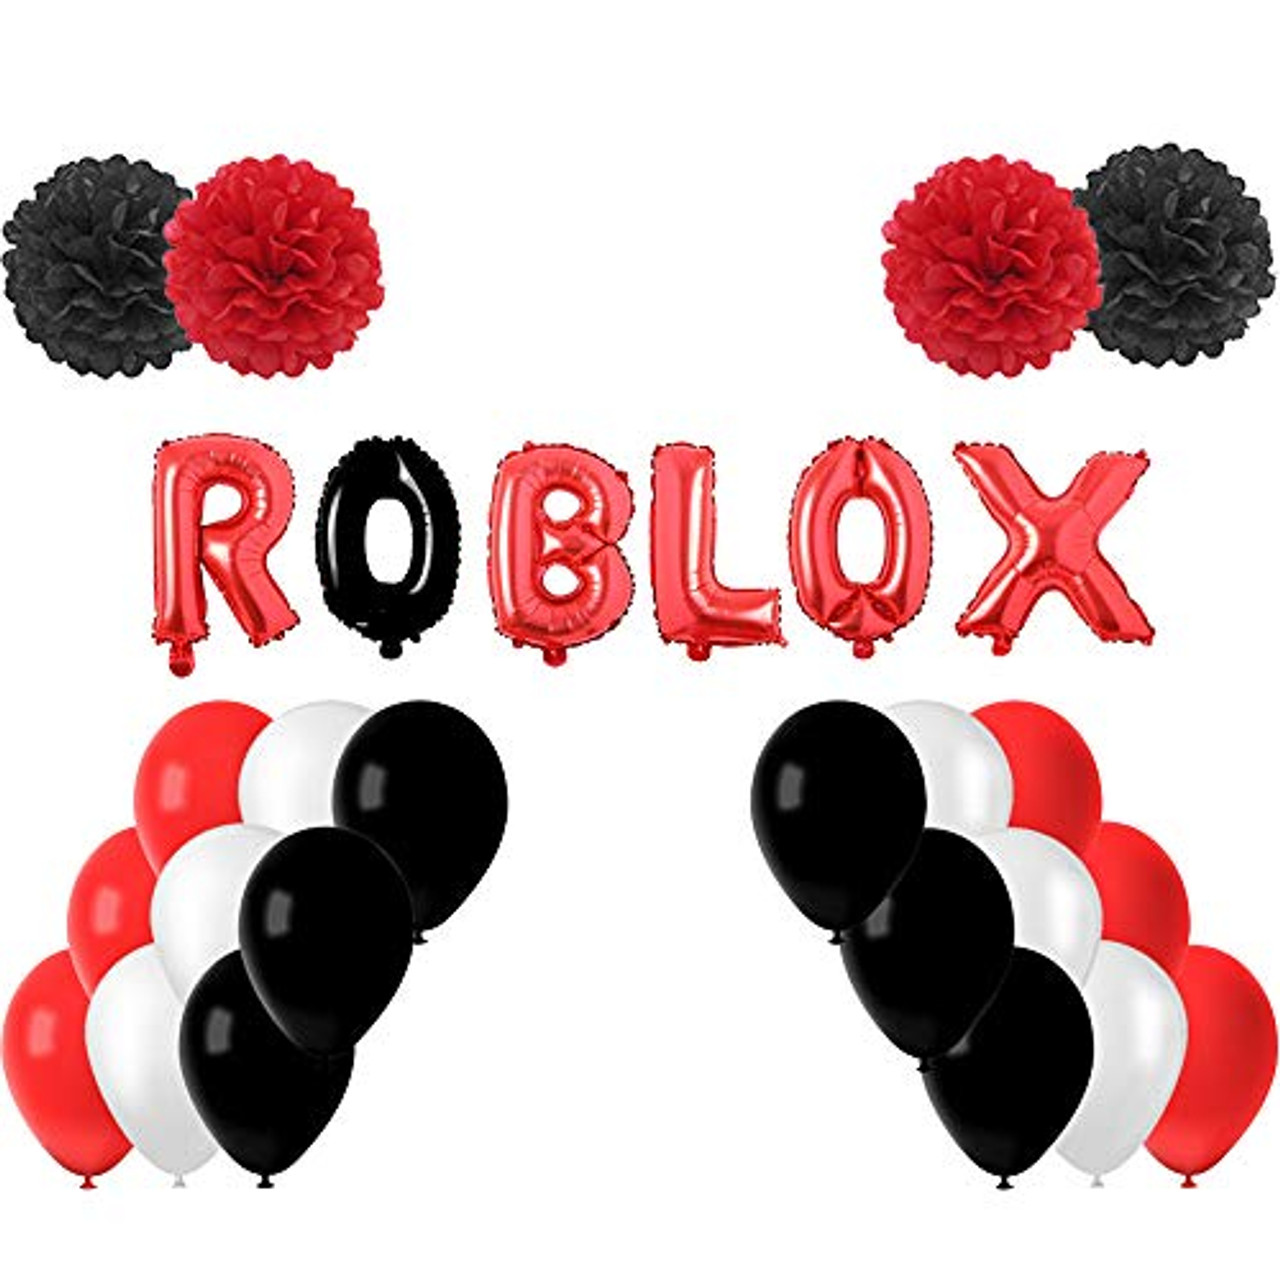 28 Counts Party Favors For Roblox Party Supplies Balloons Paper Flowers Decorations Game Theme Birthday Party Toyboxtech - roblox theme party supplies